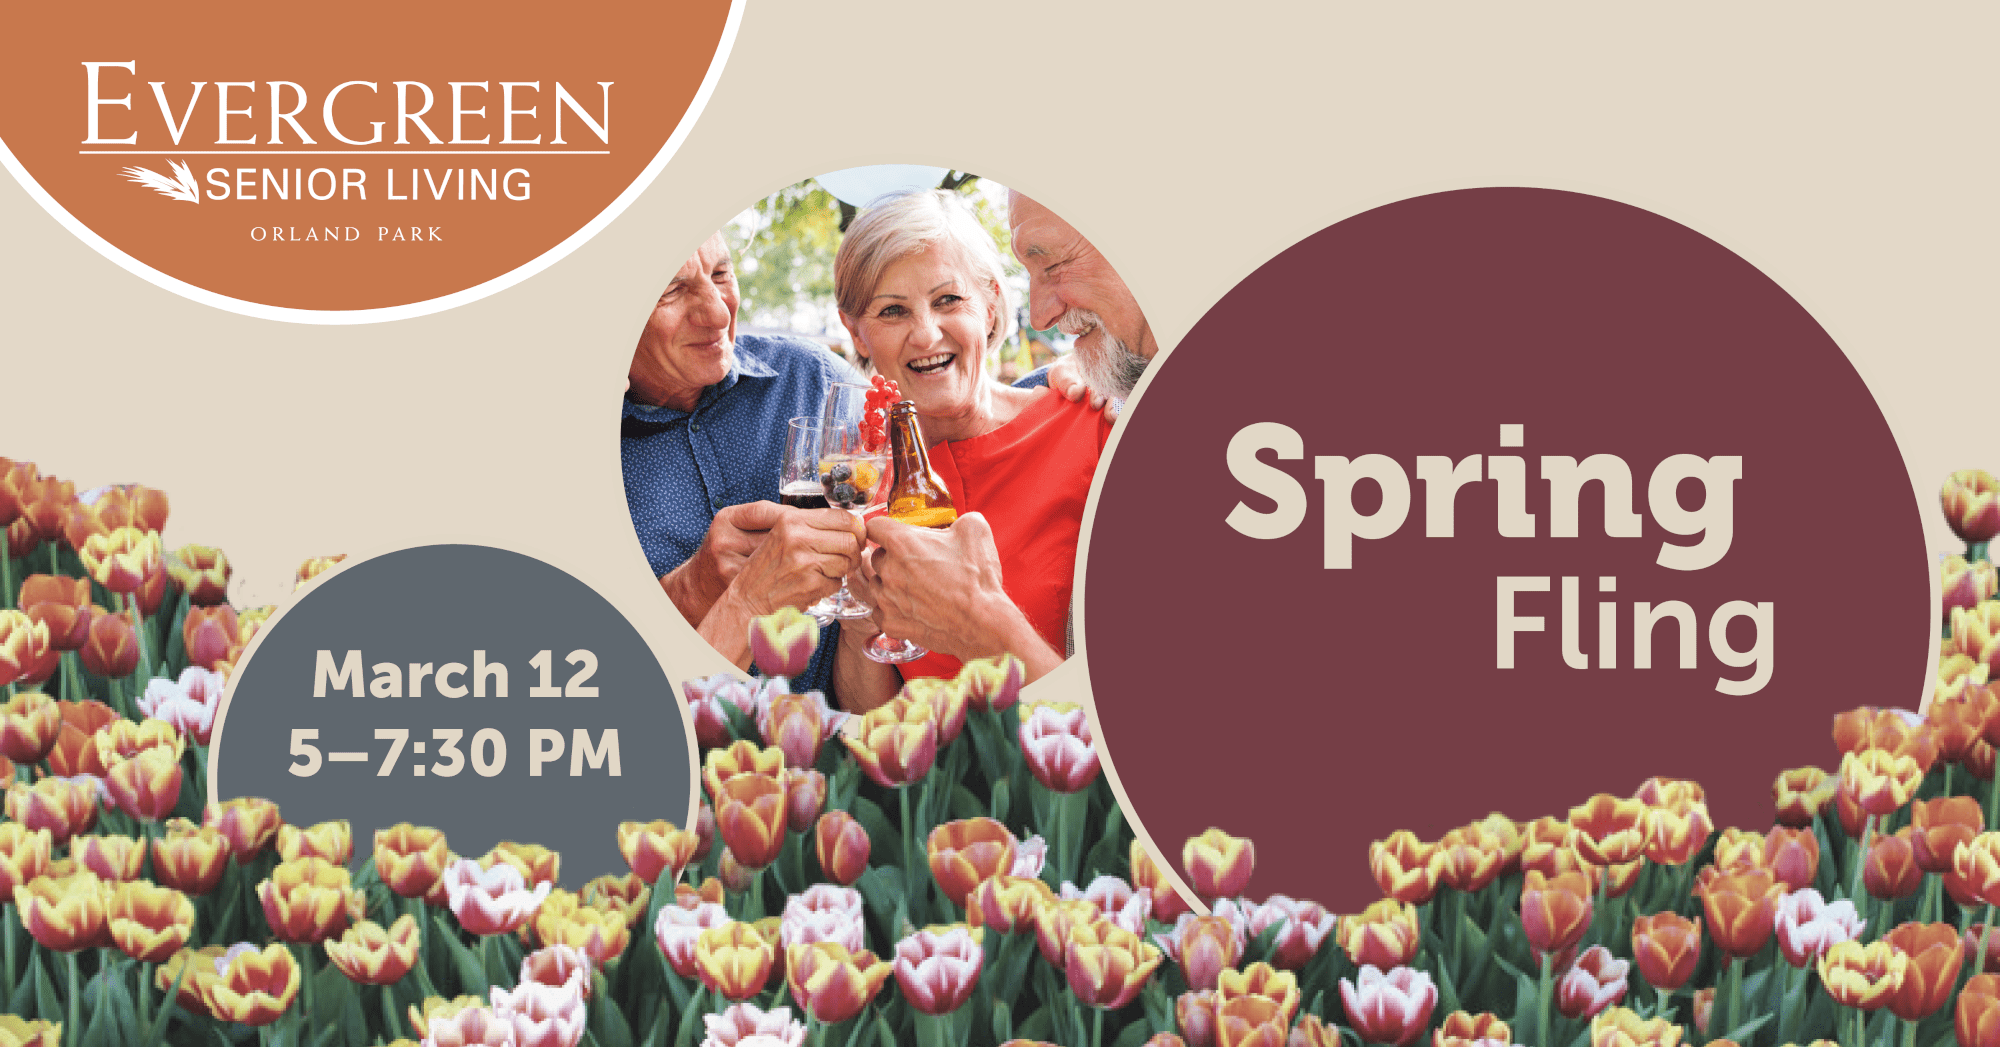 Join the Party at Evergreen Senior Living’s Annual Spring Fling